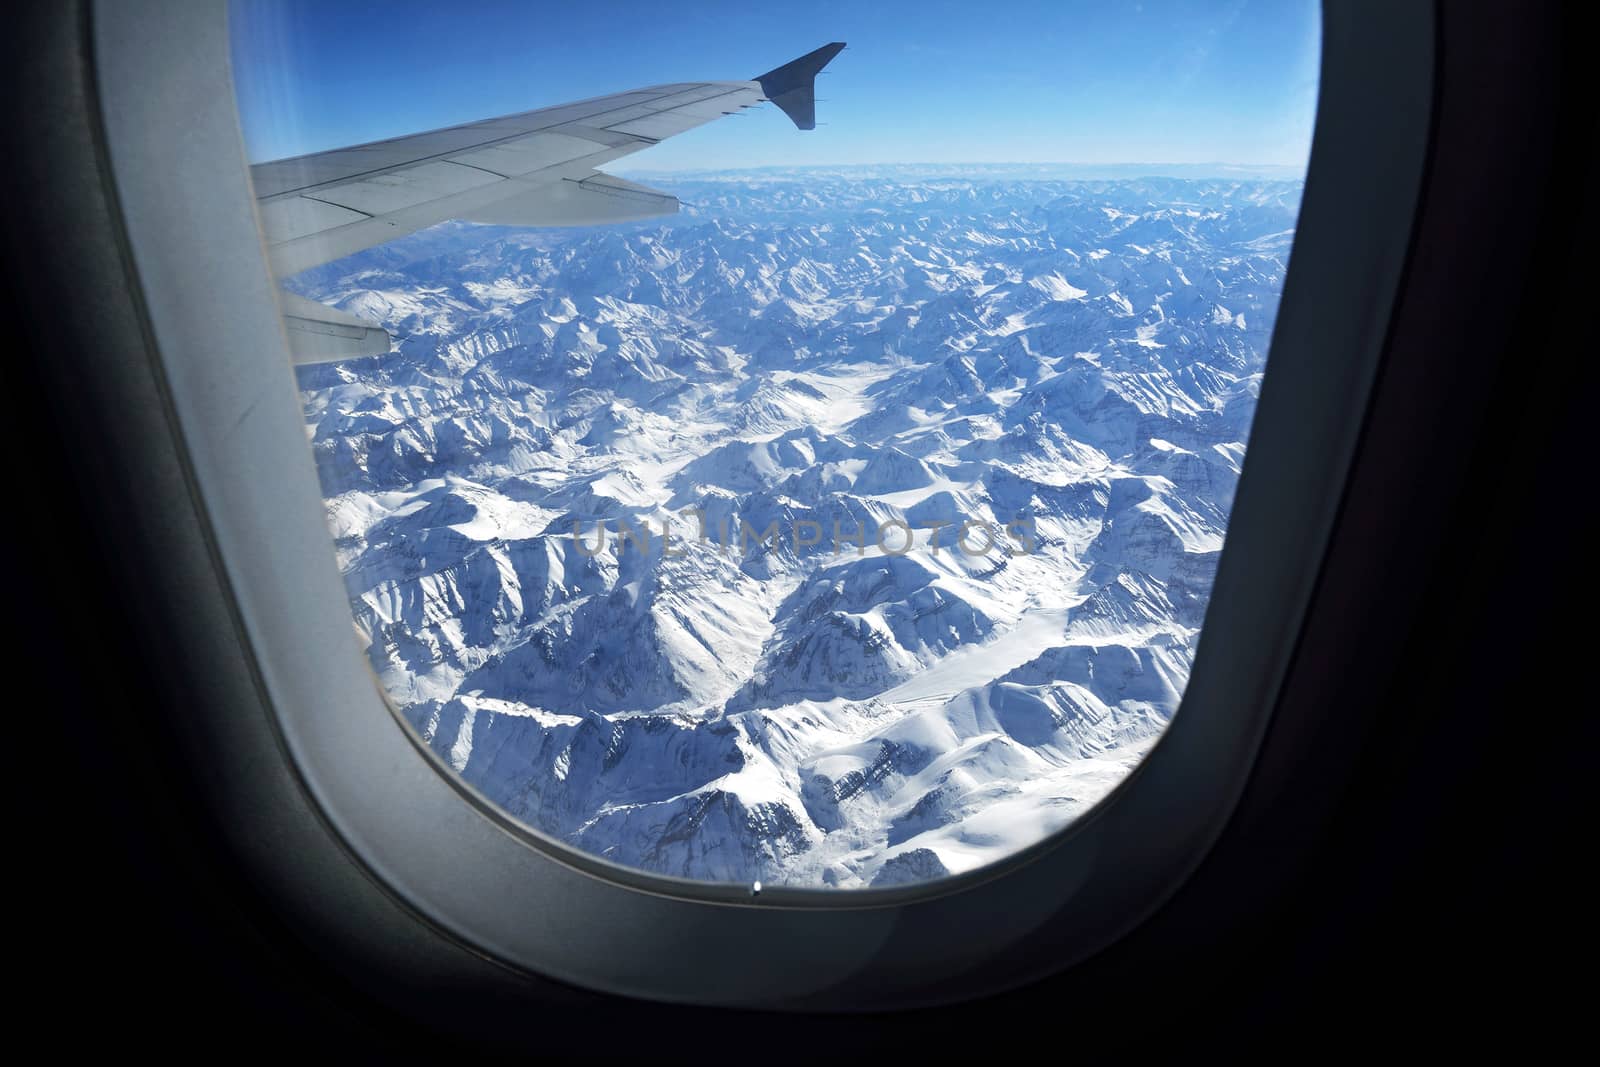 Mountain range view from aircraft window, Leh, Ladakh, India by think4photop